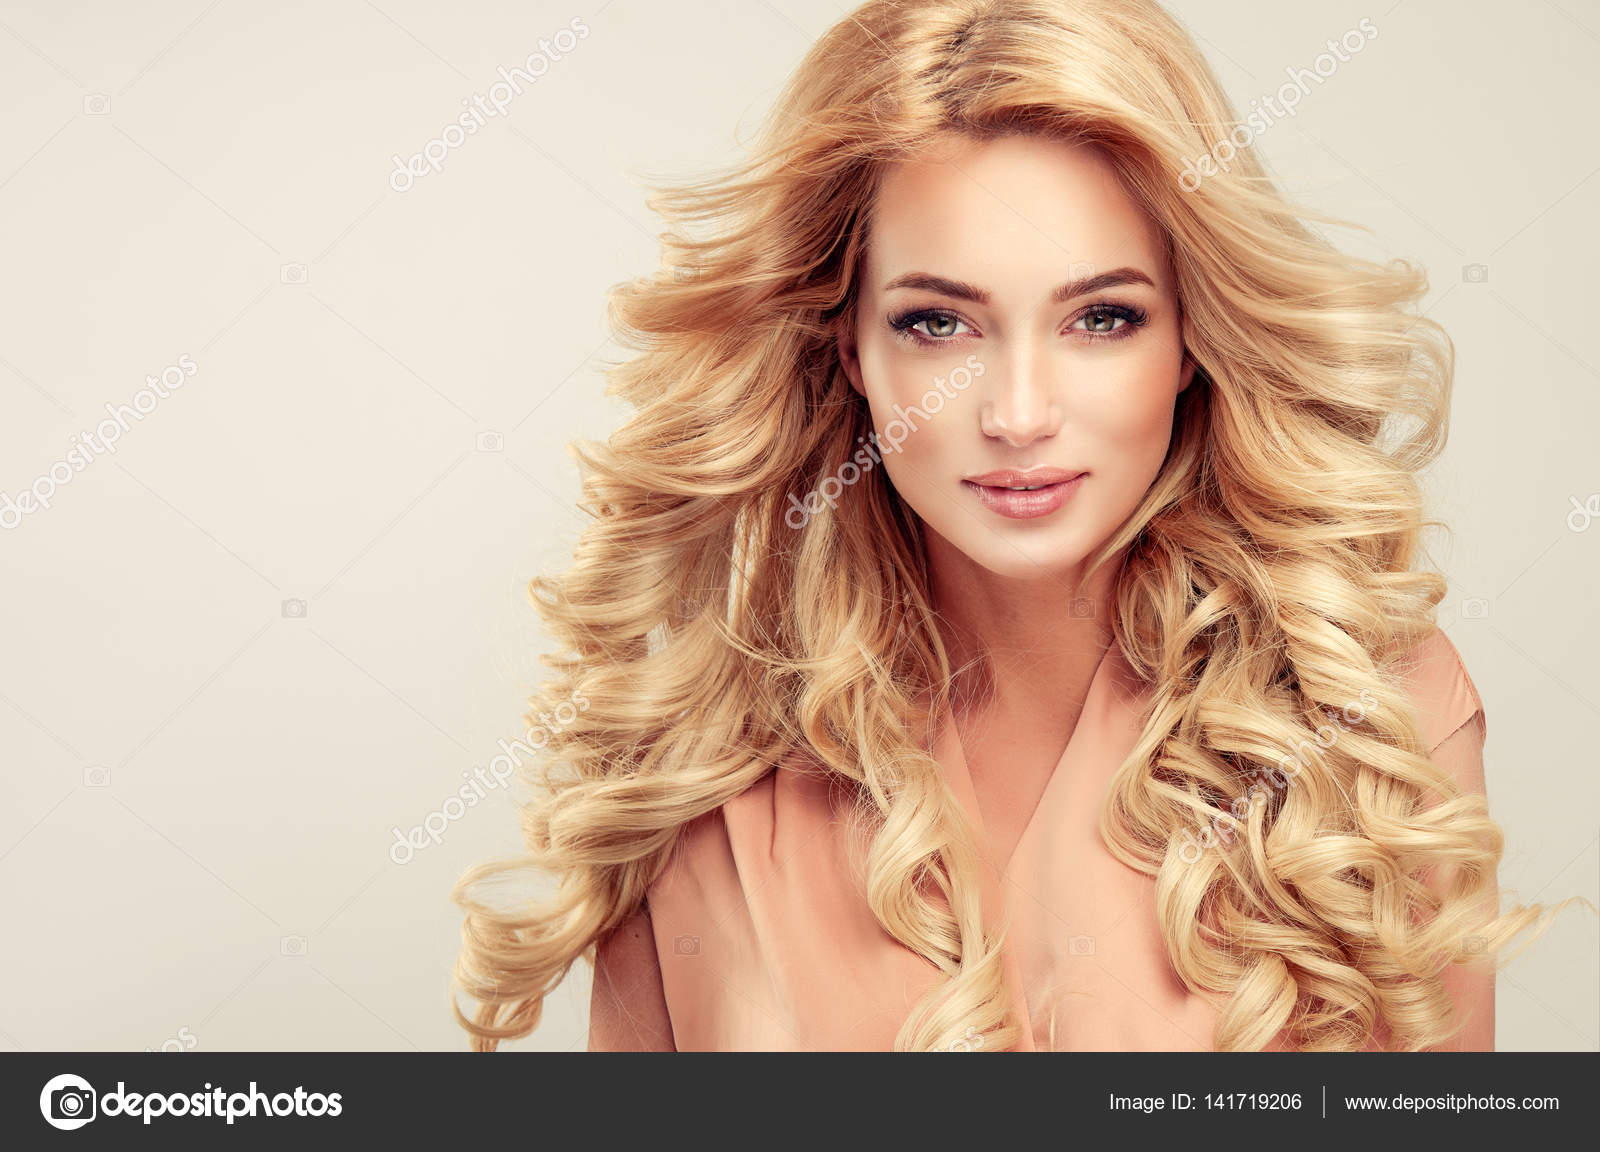 5. "How to Get the Most Beautiful Blond Hair Naturally" - wide 7